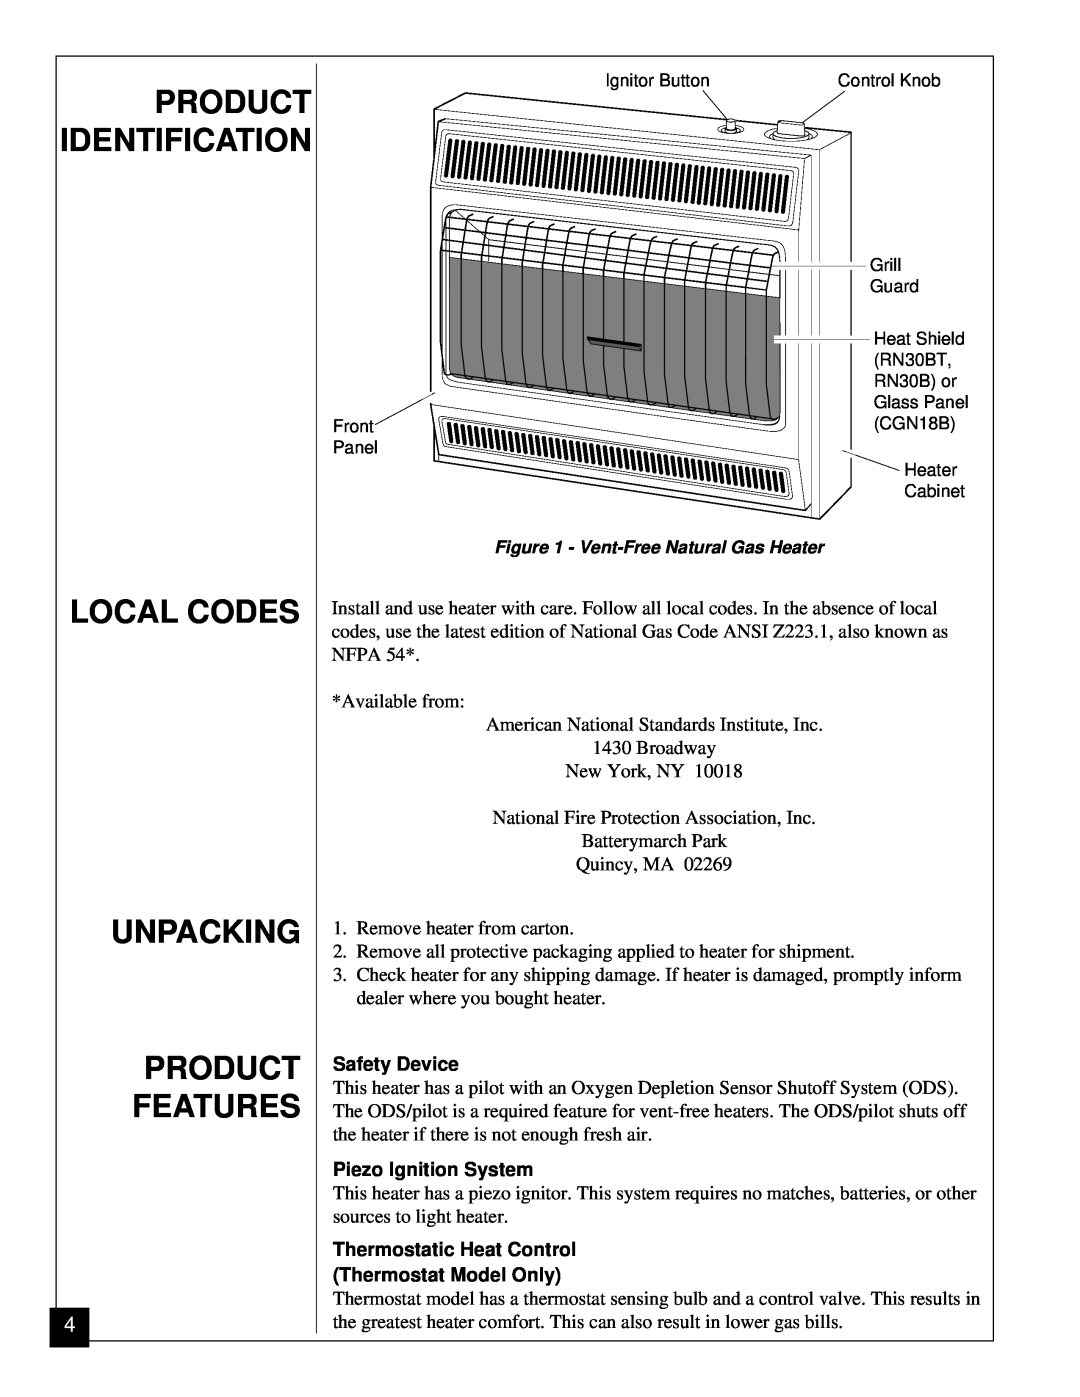 Desa RN30BT installation manual Local Codes Unpacking Product Features, Product Identification 